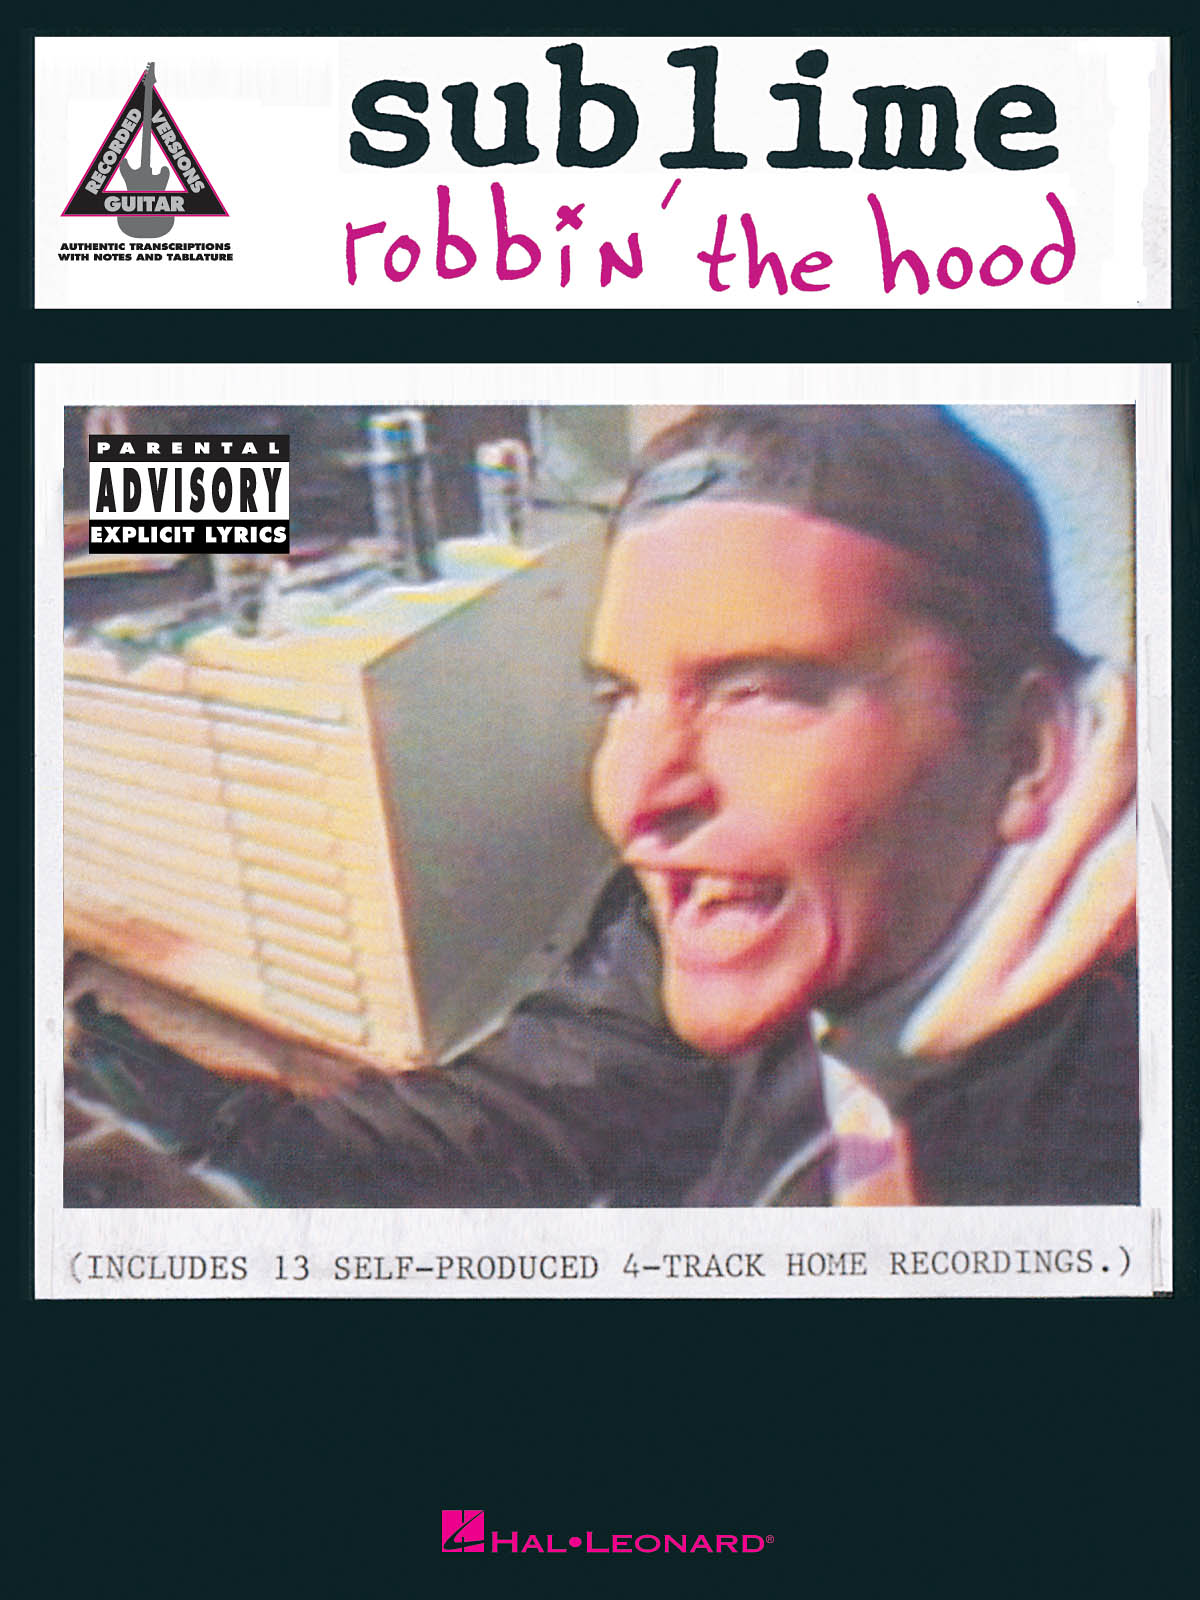 Sublime: Sublime - Robbin' the Hood: Guitar Solo: Artist Songbook